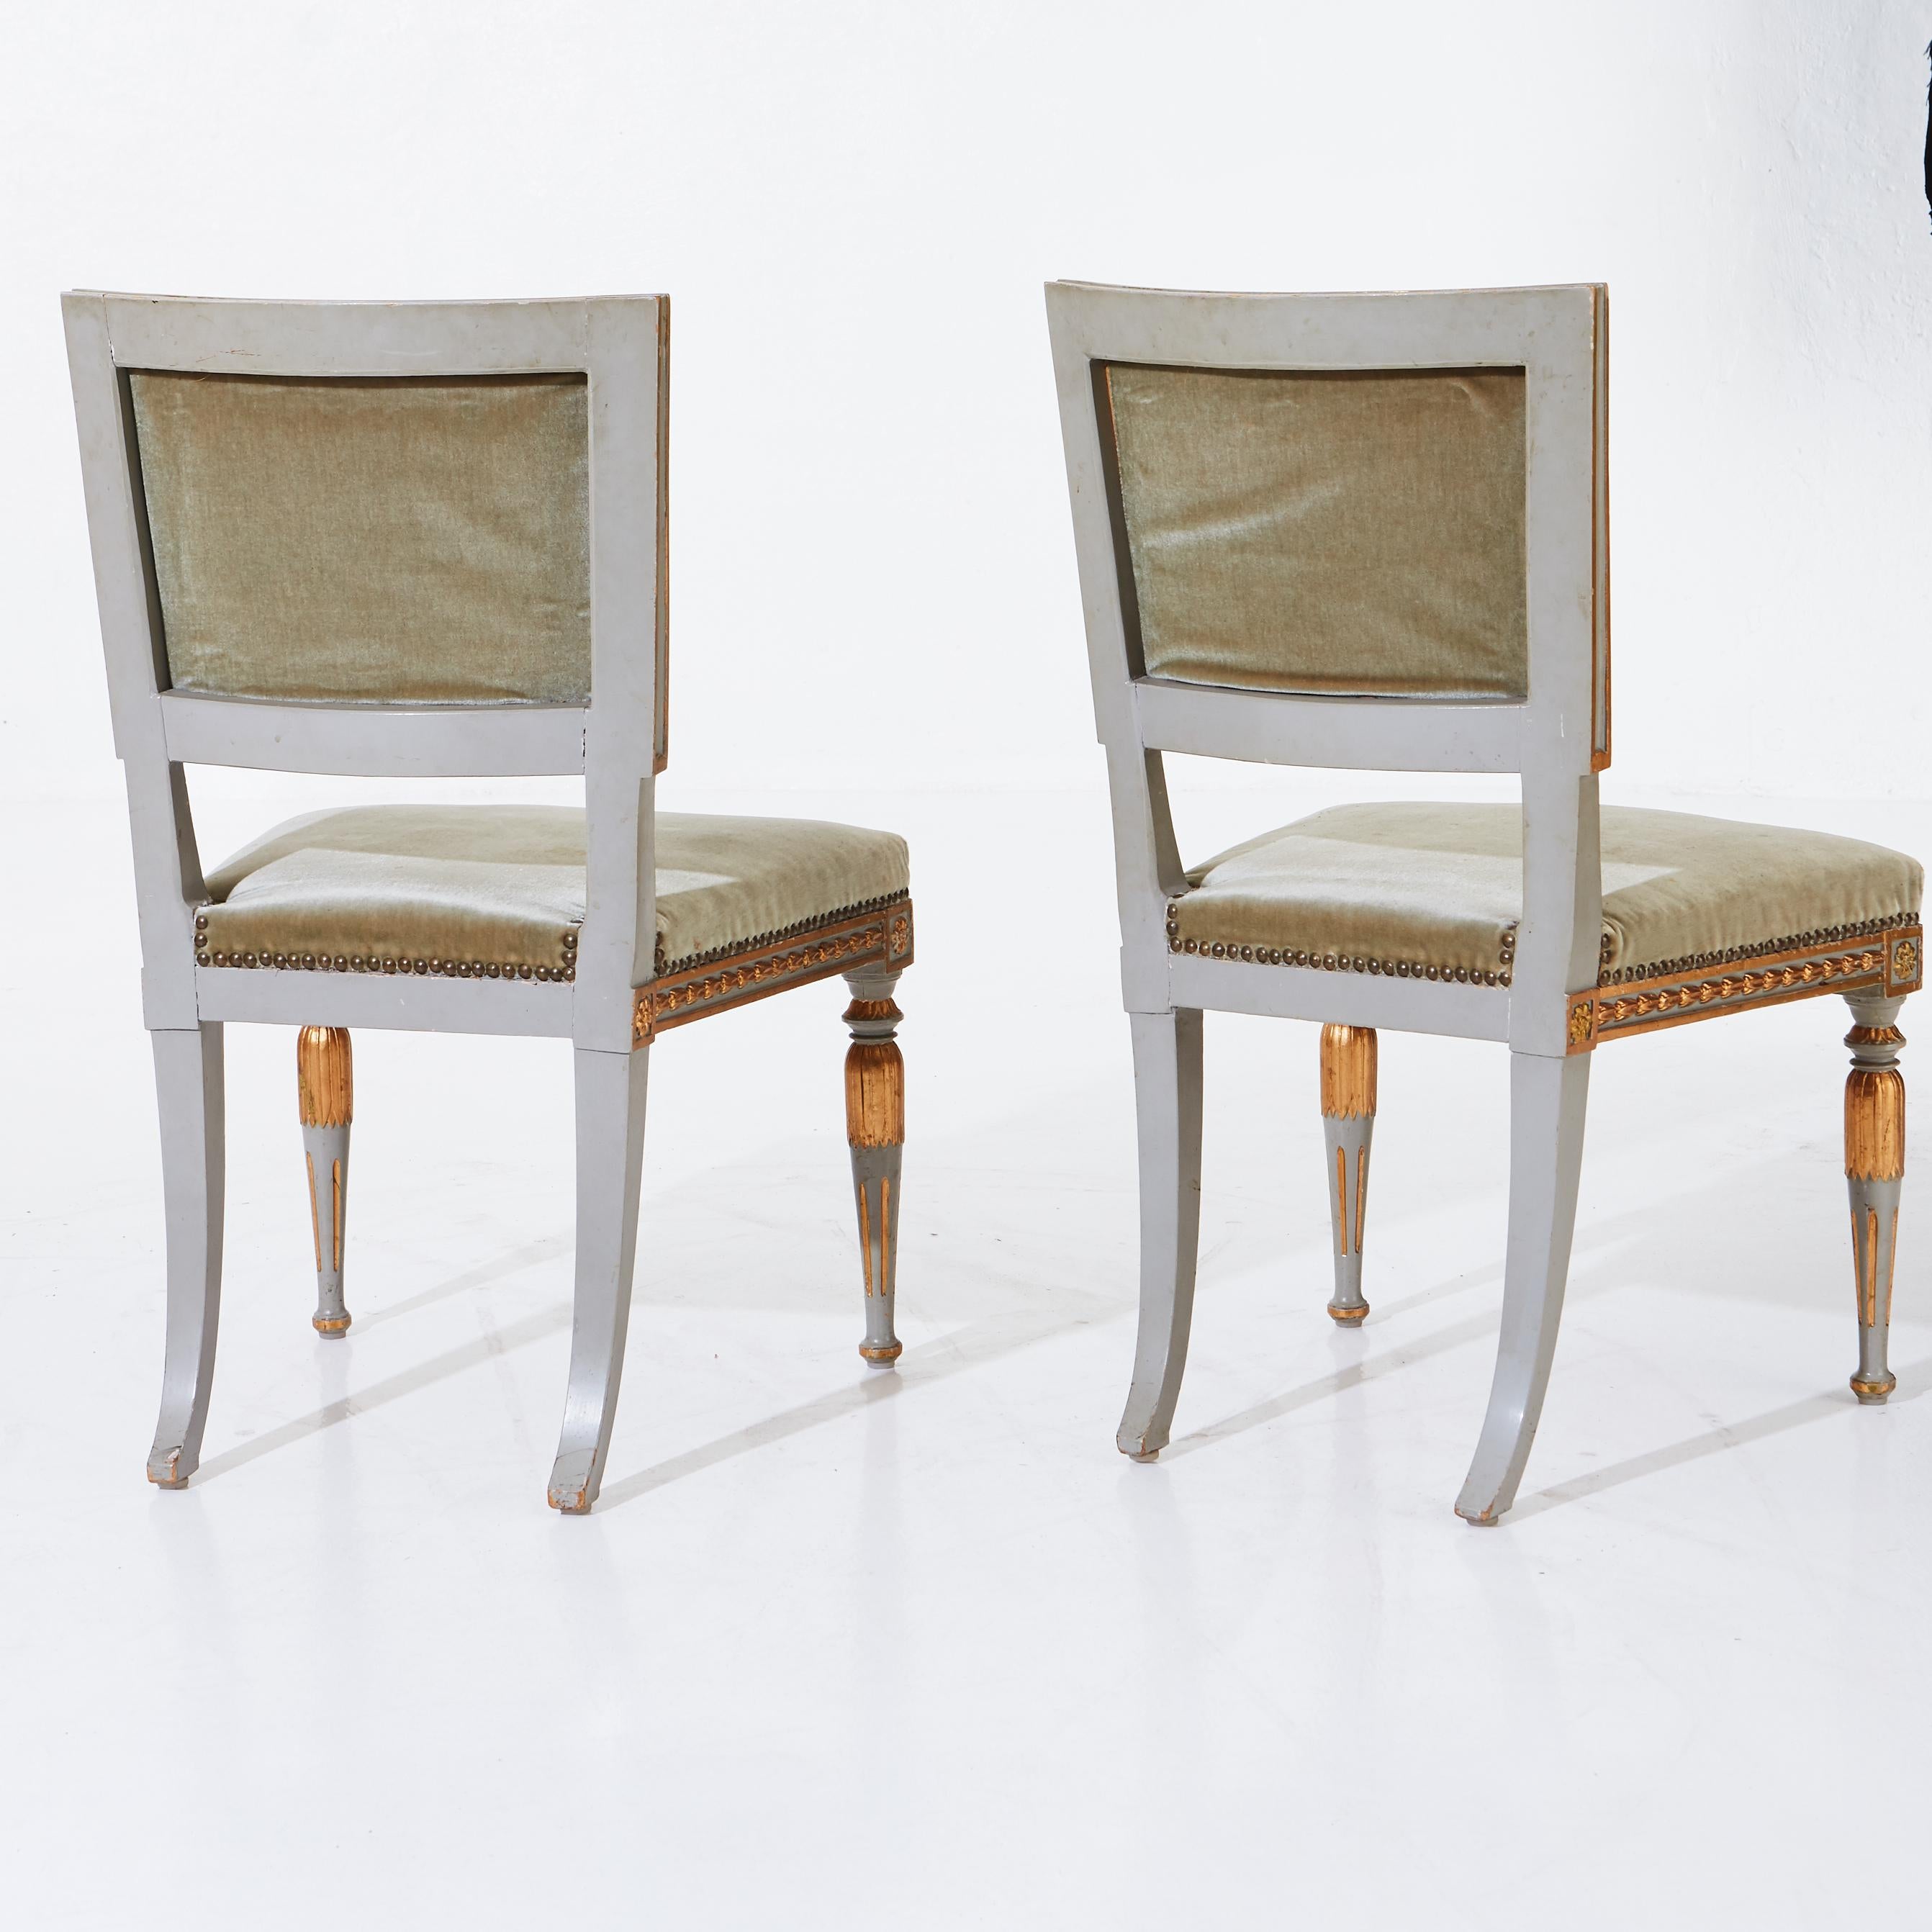 Wood Pair of Stamped Ephraim Ståhl Late Gustavian Chairs, circa 1800, Stockholm